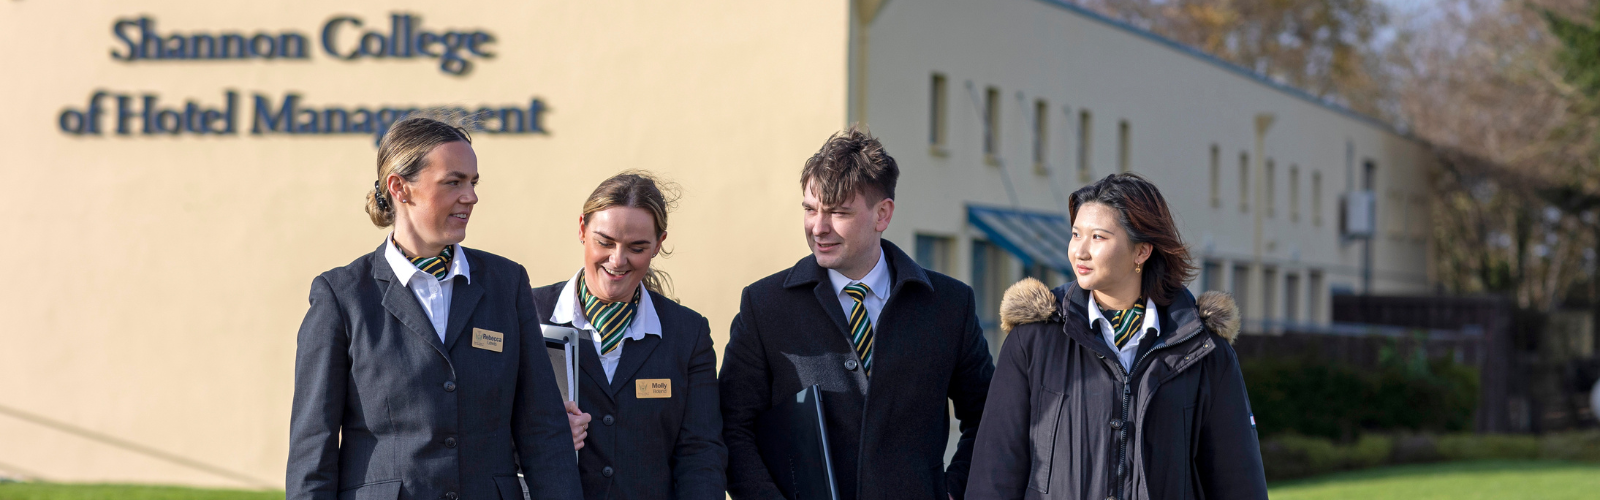 Shannon College of Hotel Management 